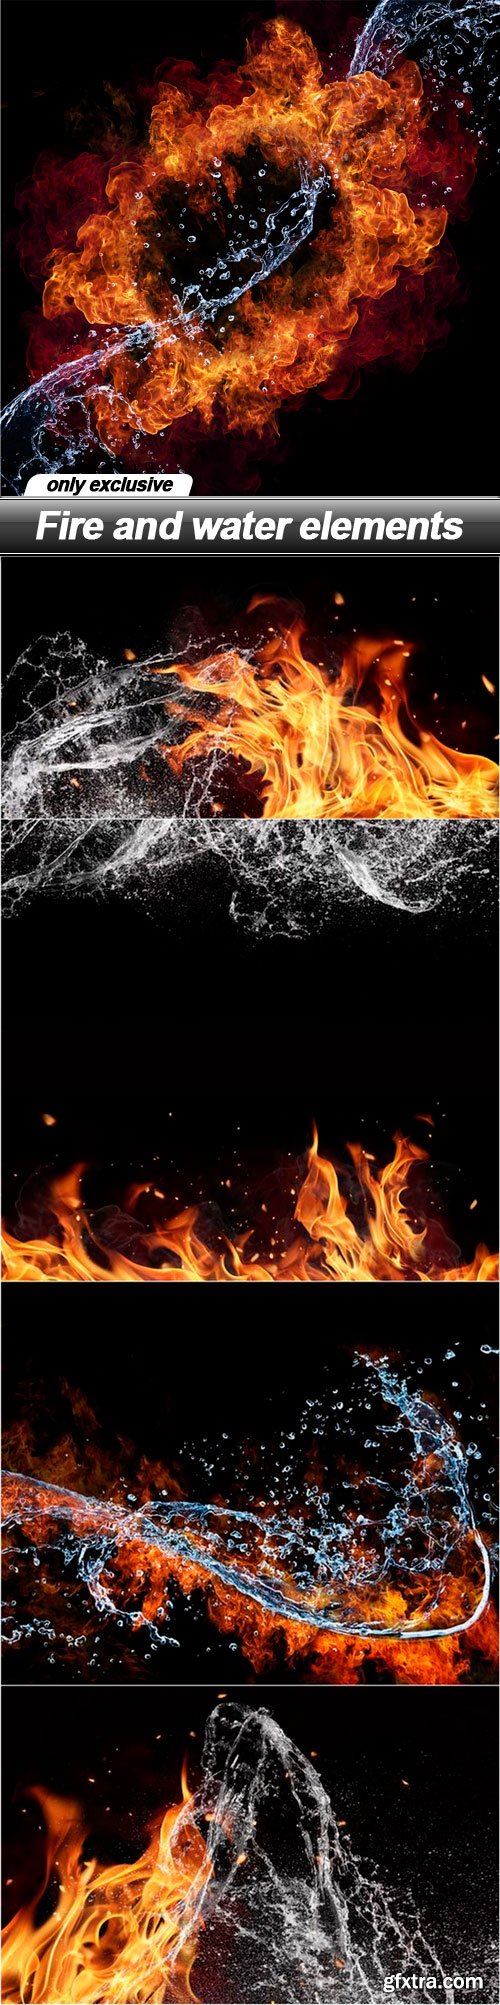 Fire and water elements - 5 UHQ JPEG